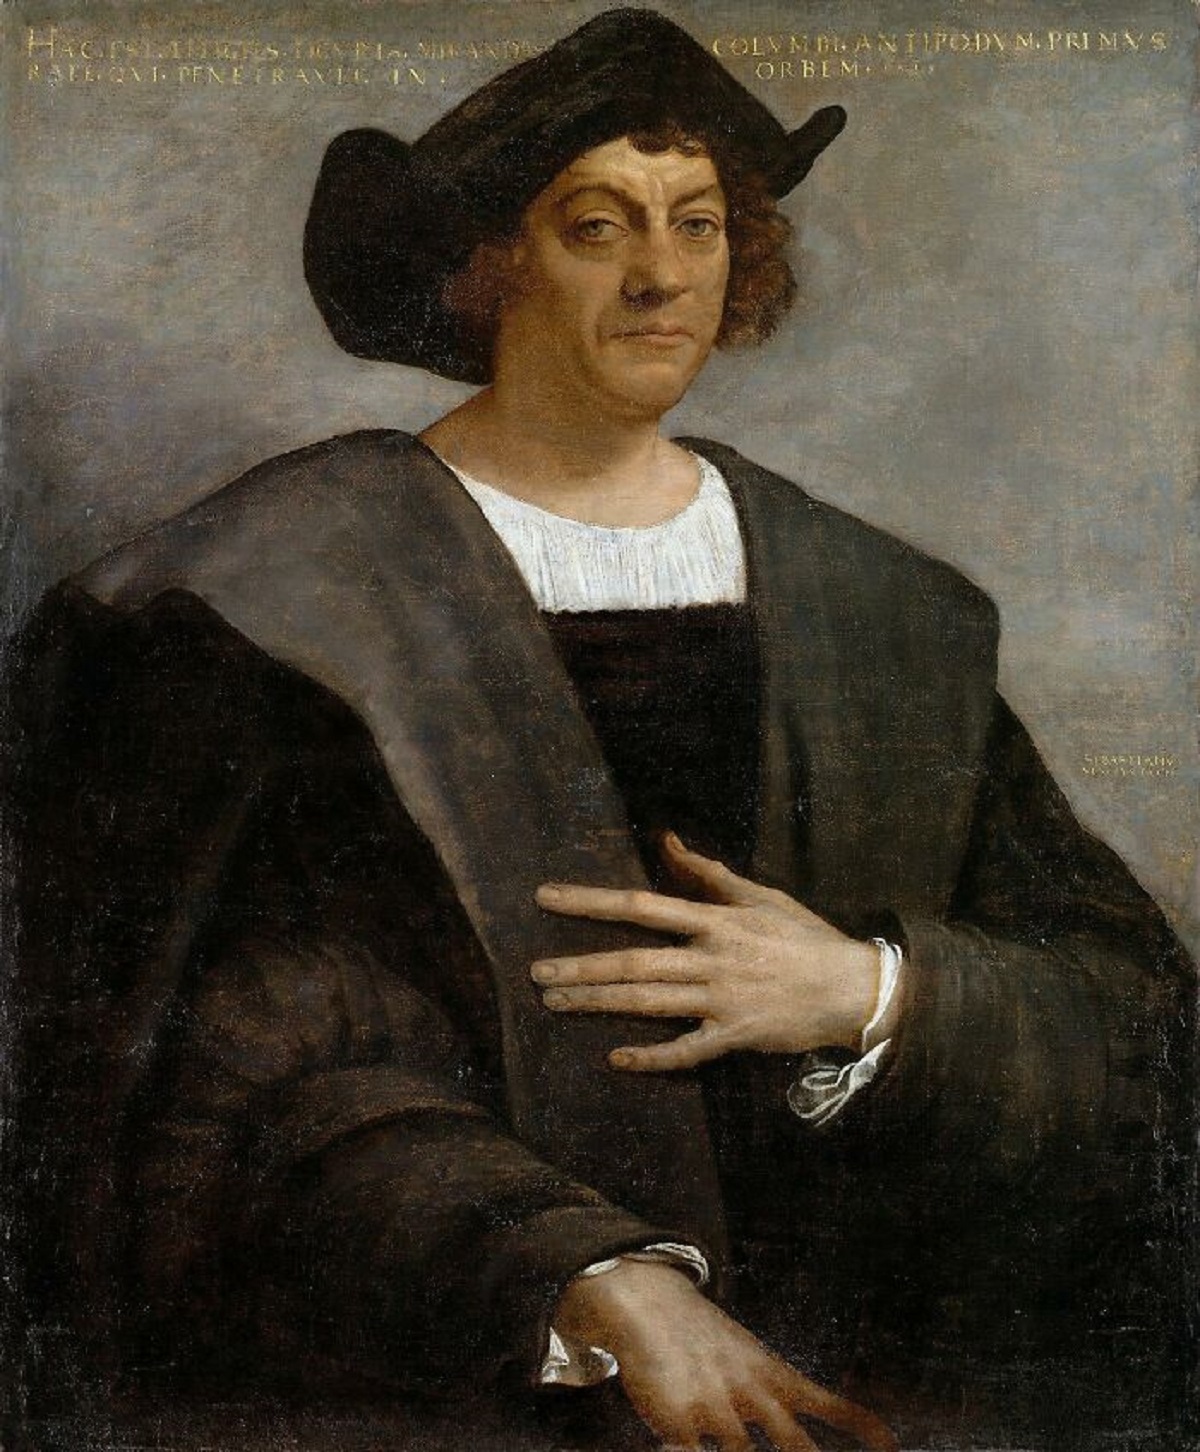 Christopher Columbus.

Quick reminder, the imperialist and slave-holding nation of Spain sent him to prison once he got back from the new world because his monstrous brutality towards his slaves was too much even for them.